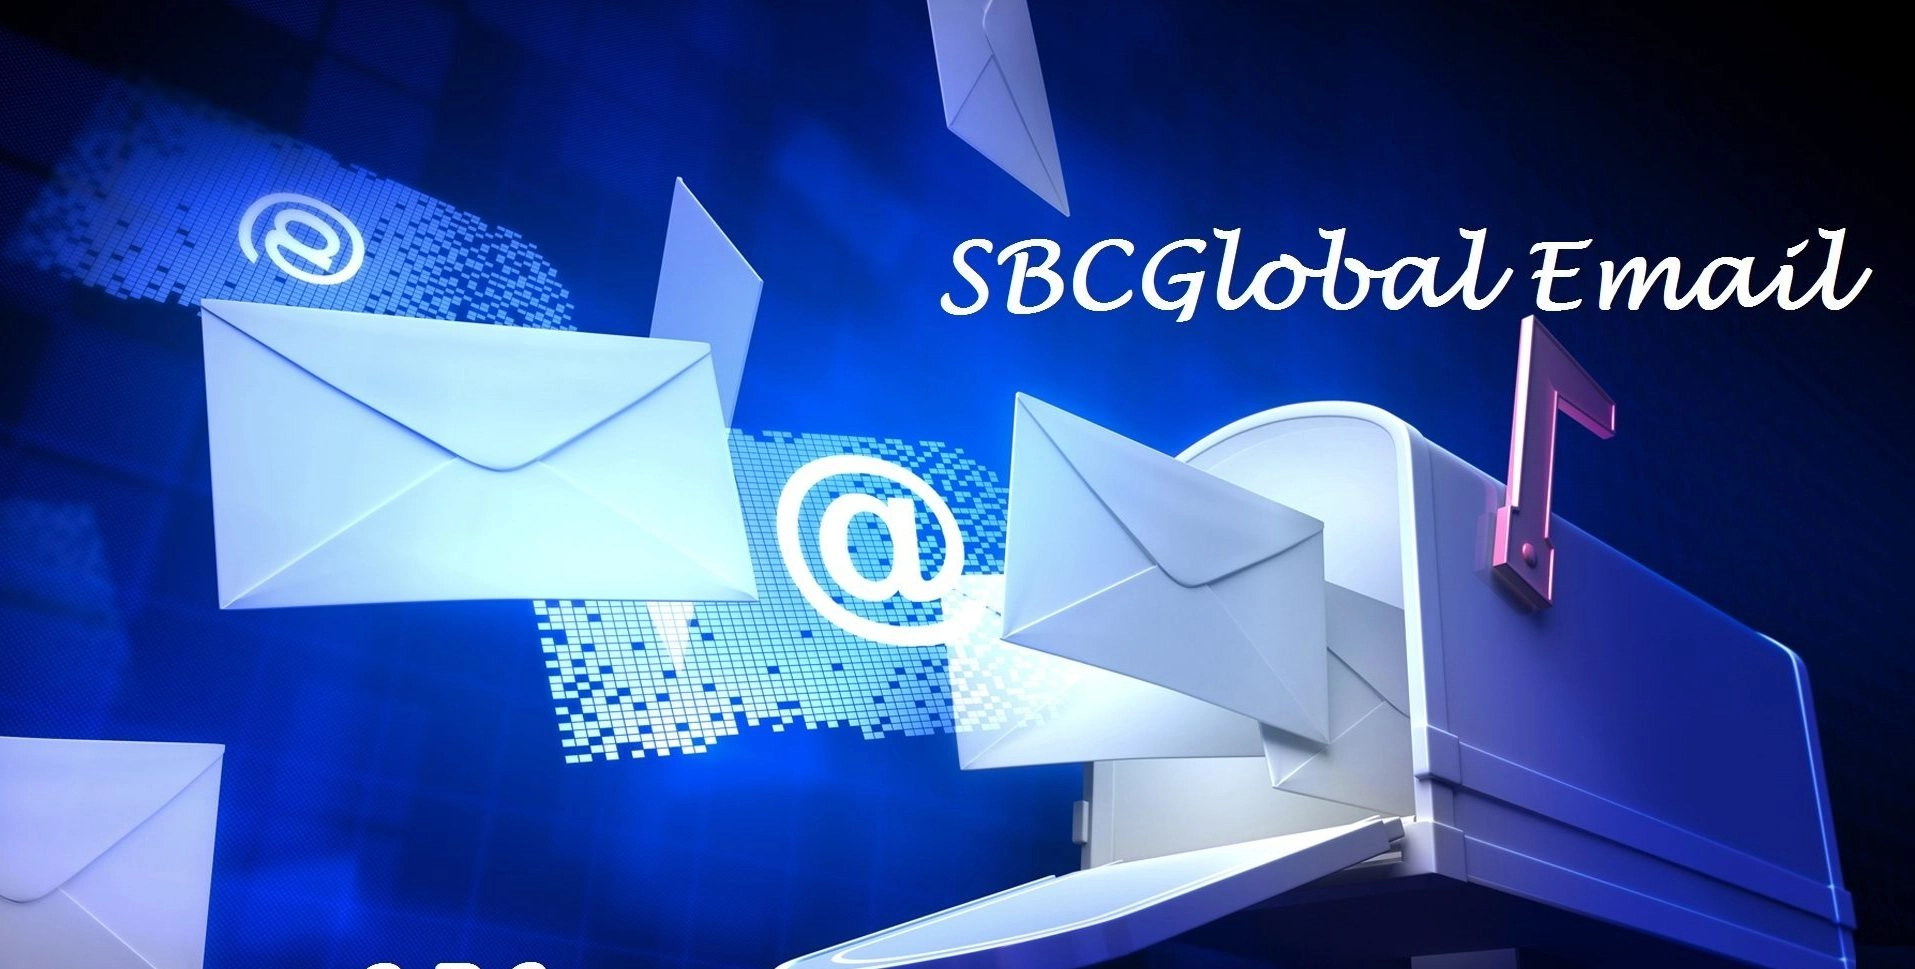 at&t net email login, SBCglobal net mail,